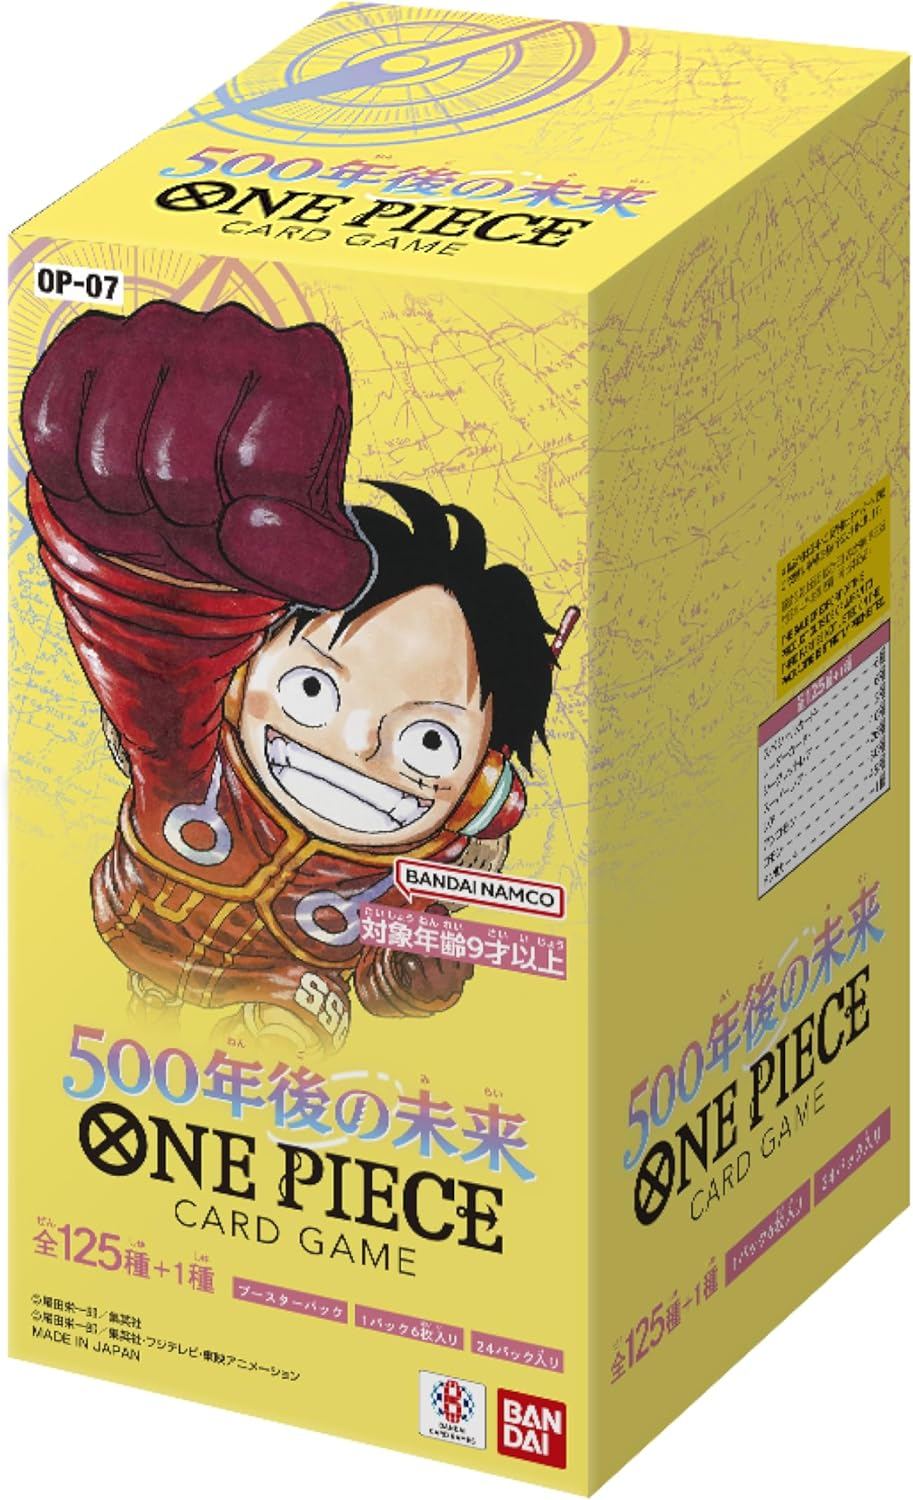 One Piece Card Game 500 Years From Now OP-07 (Master Carton of 12 Boxes) Bandai